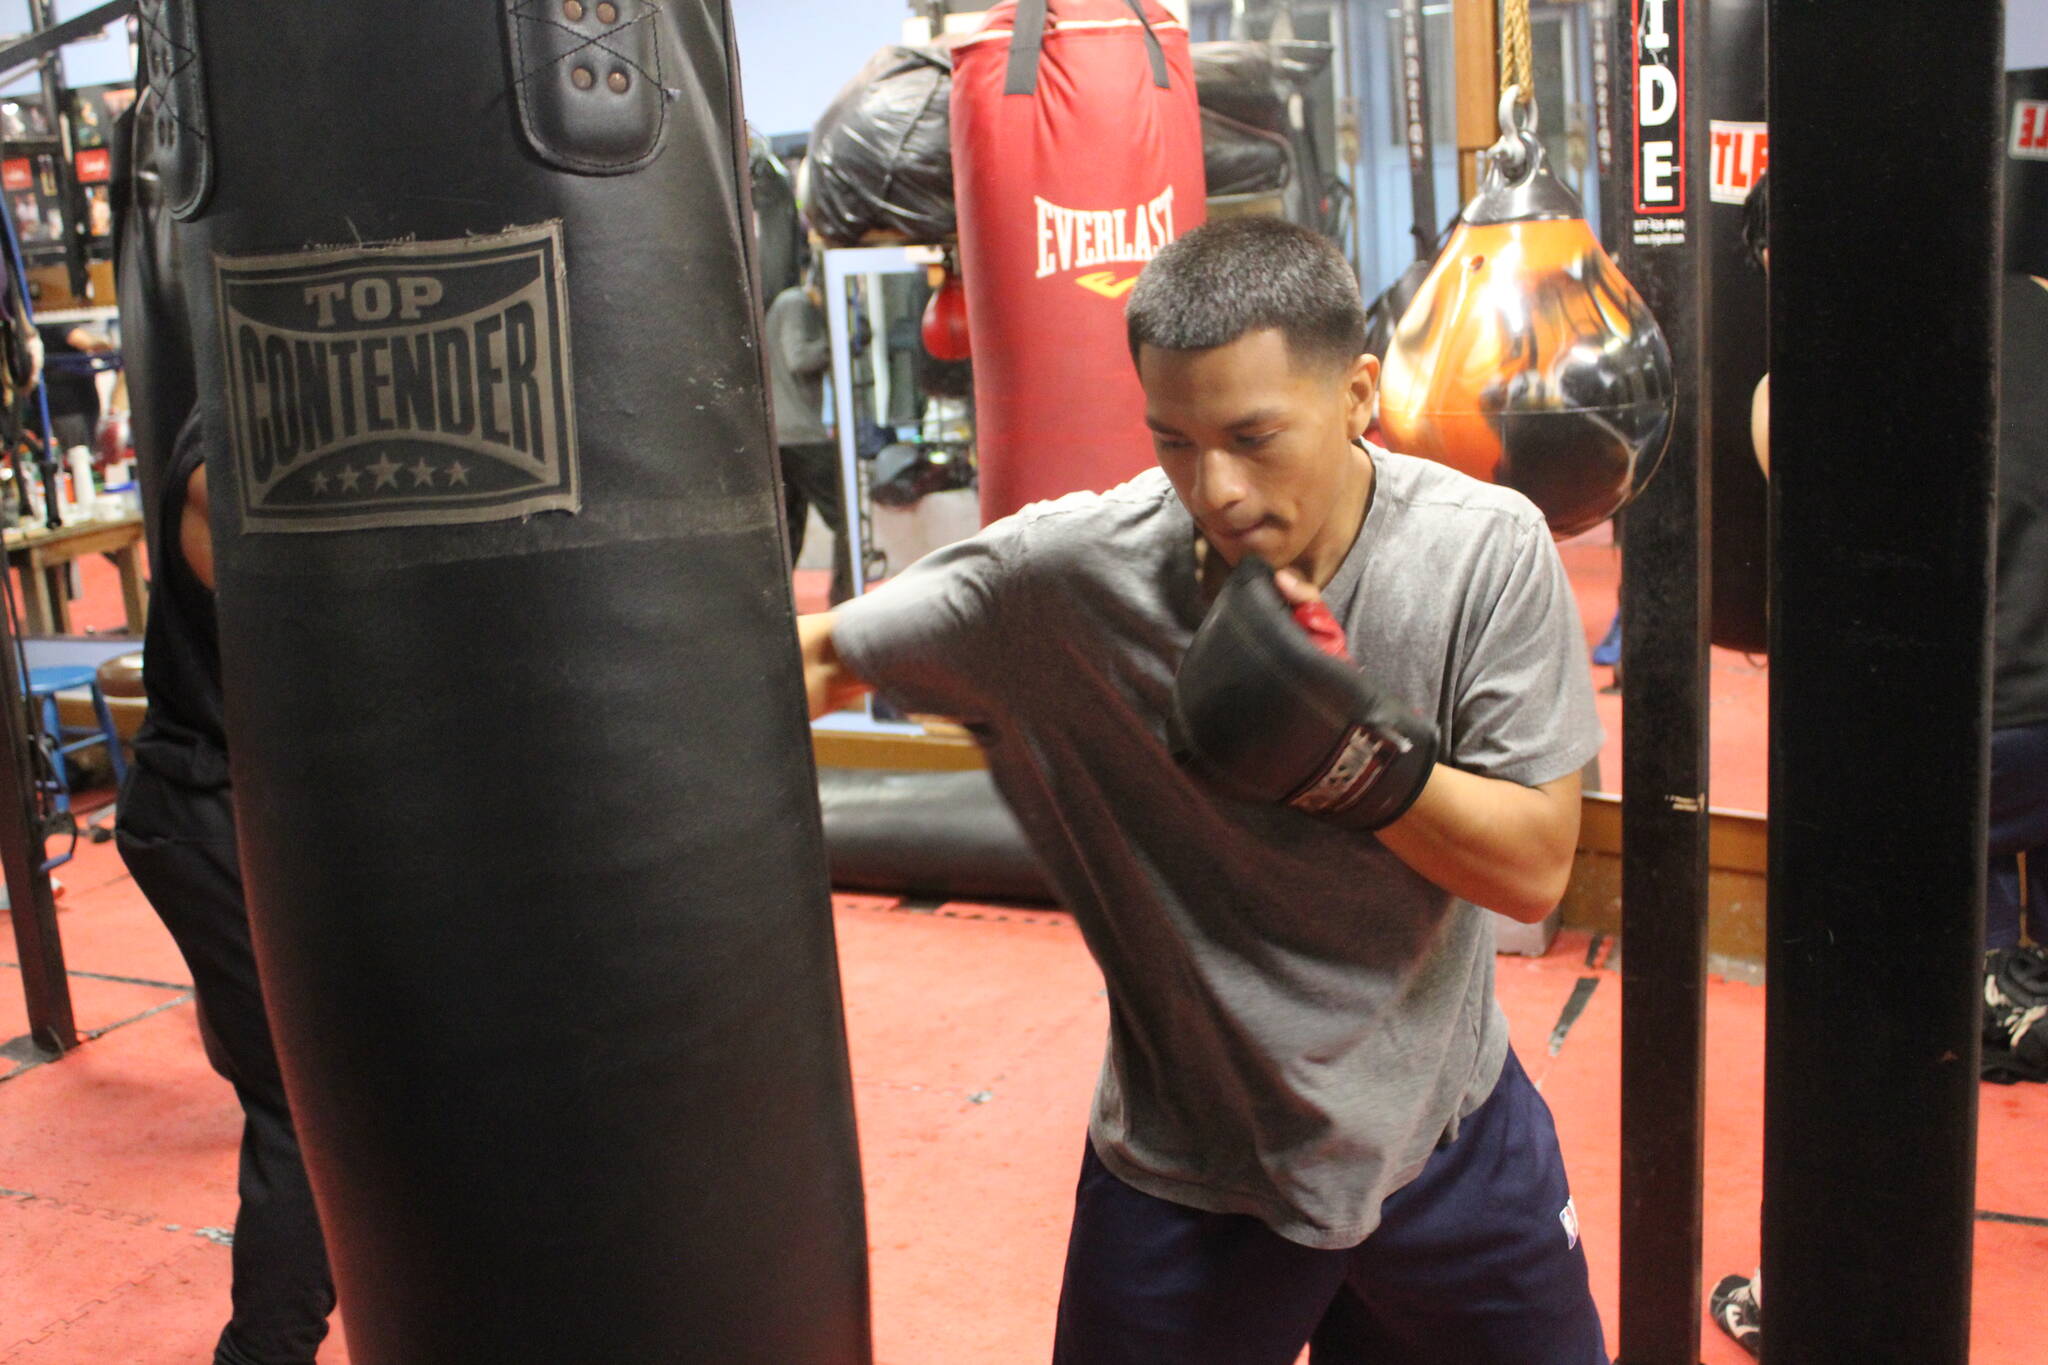 Bailey Jo Josie/Sound Publishing
Josue Cadena, 19, trains at the boxing club for three hours, five to six days a week.